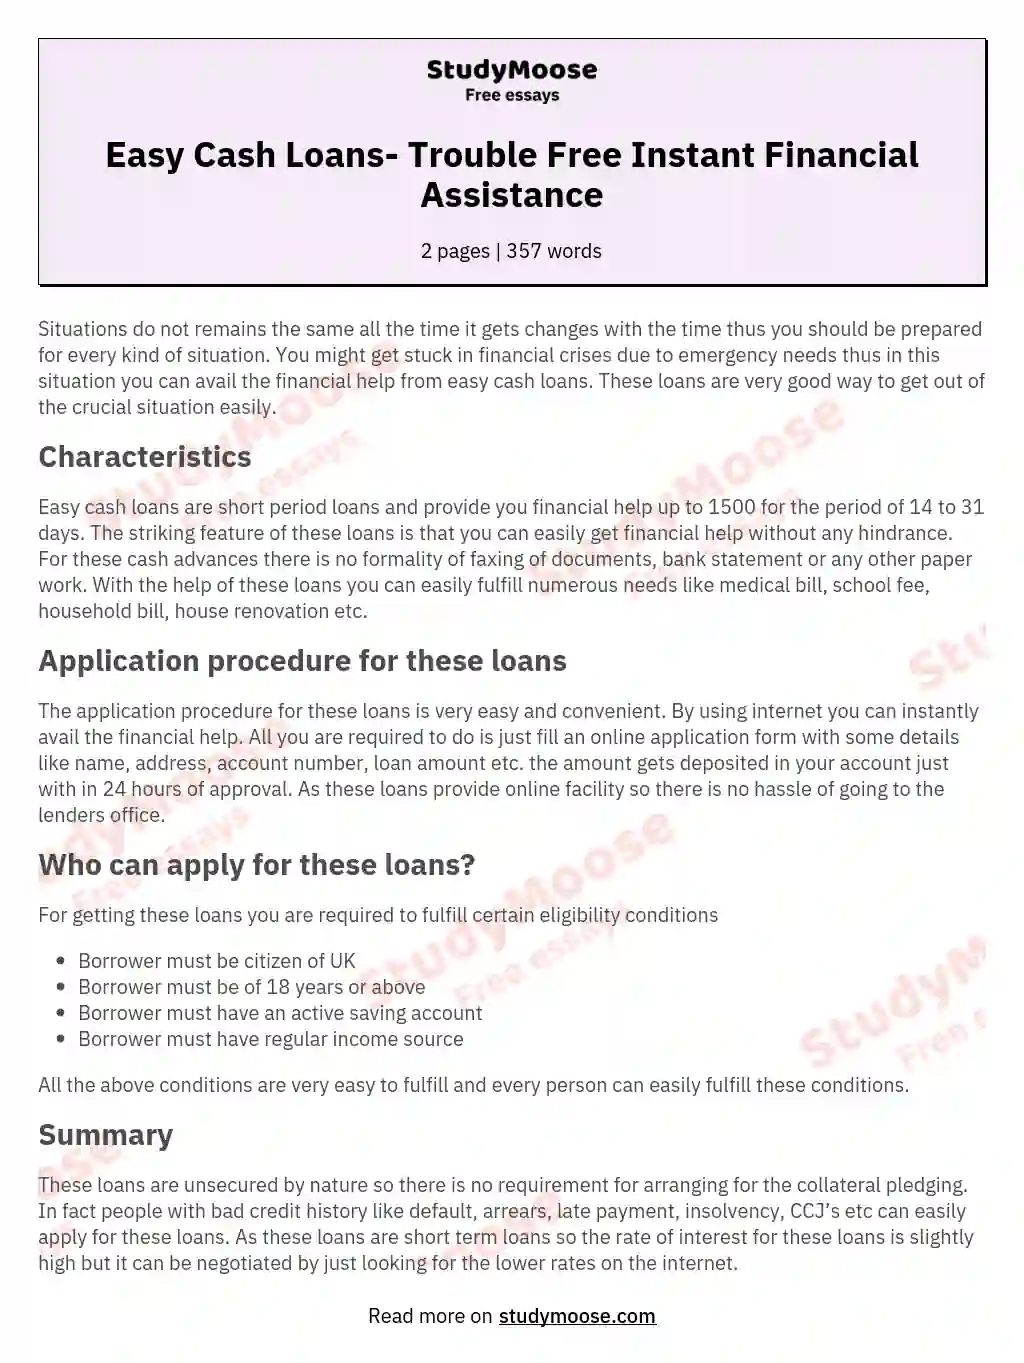 Easy Cash Loans- Trouble Free Instant Financial Assistance essay